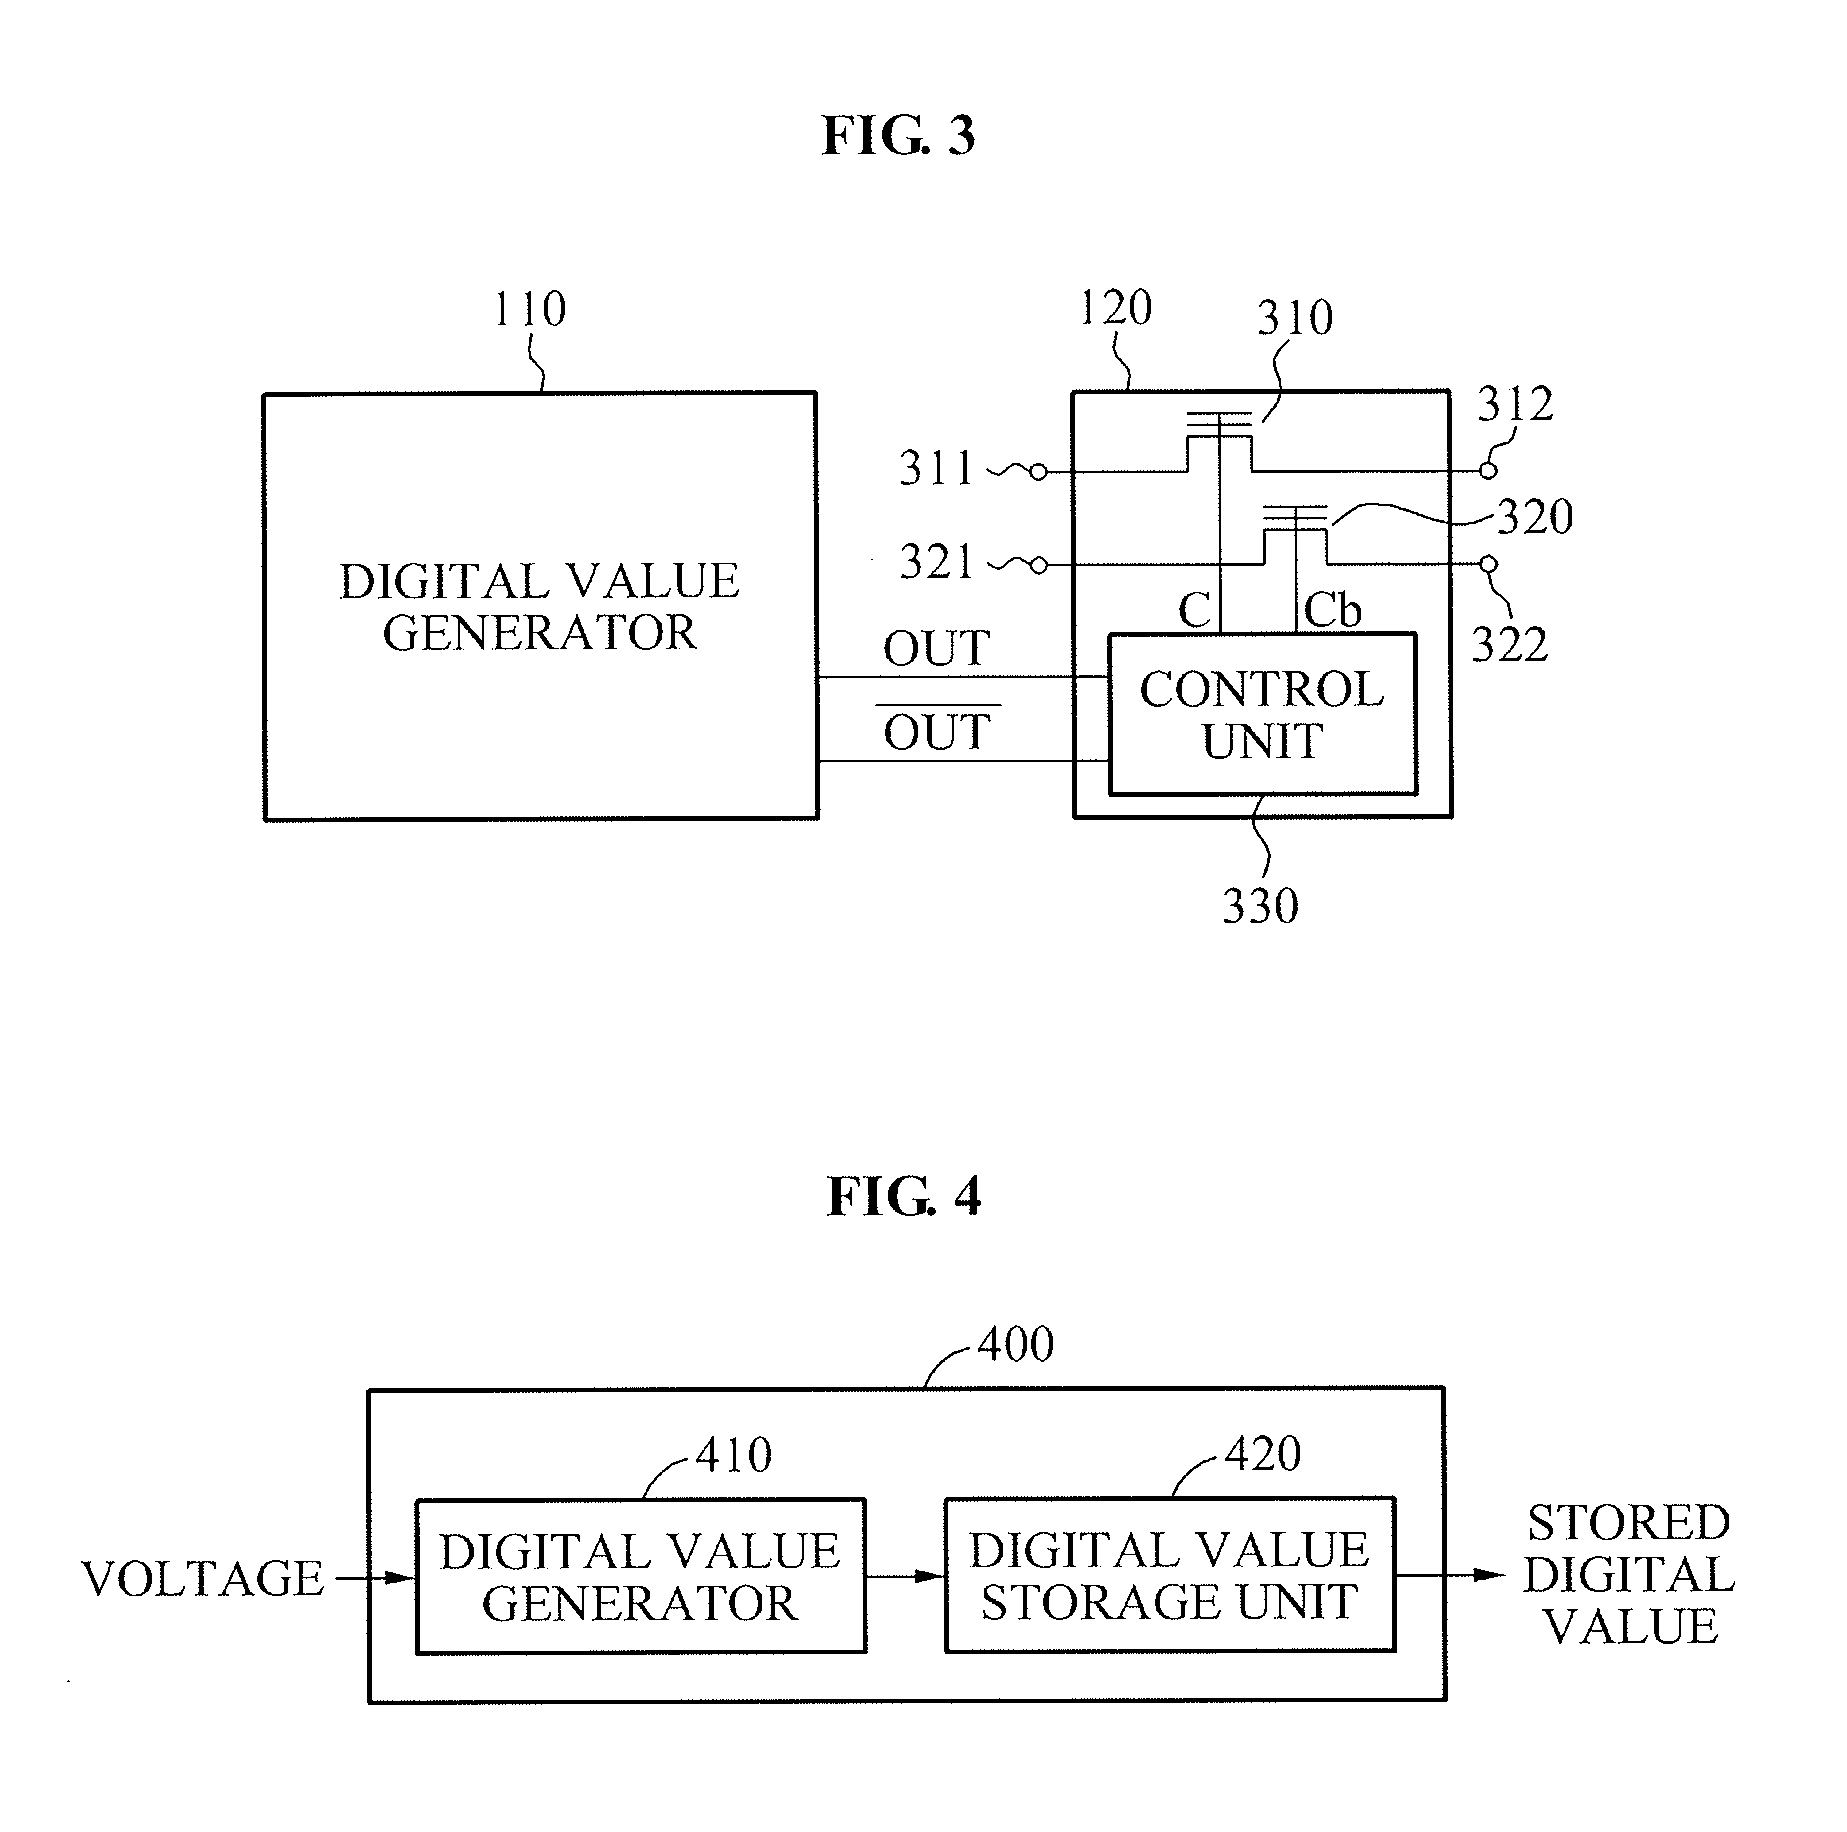 Apparatus and method for generating digital value